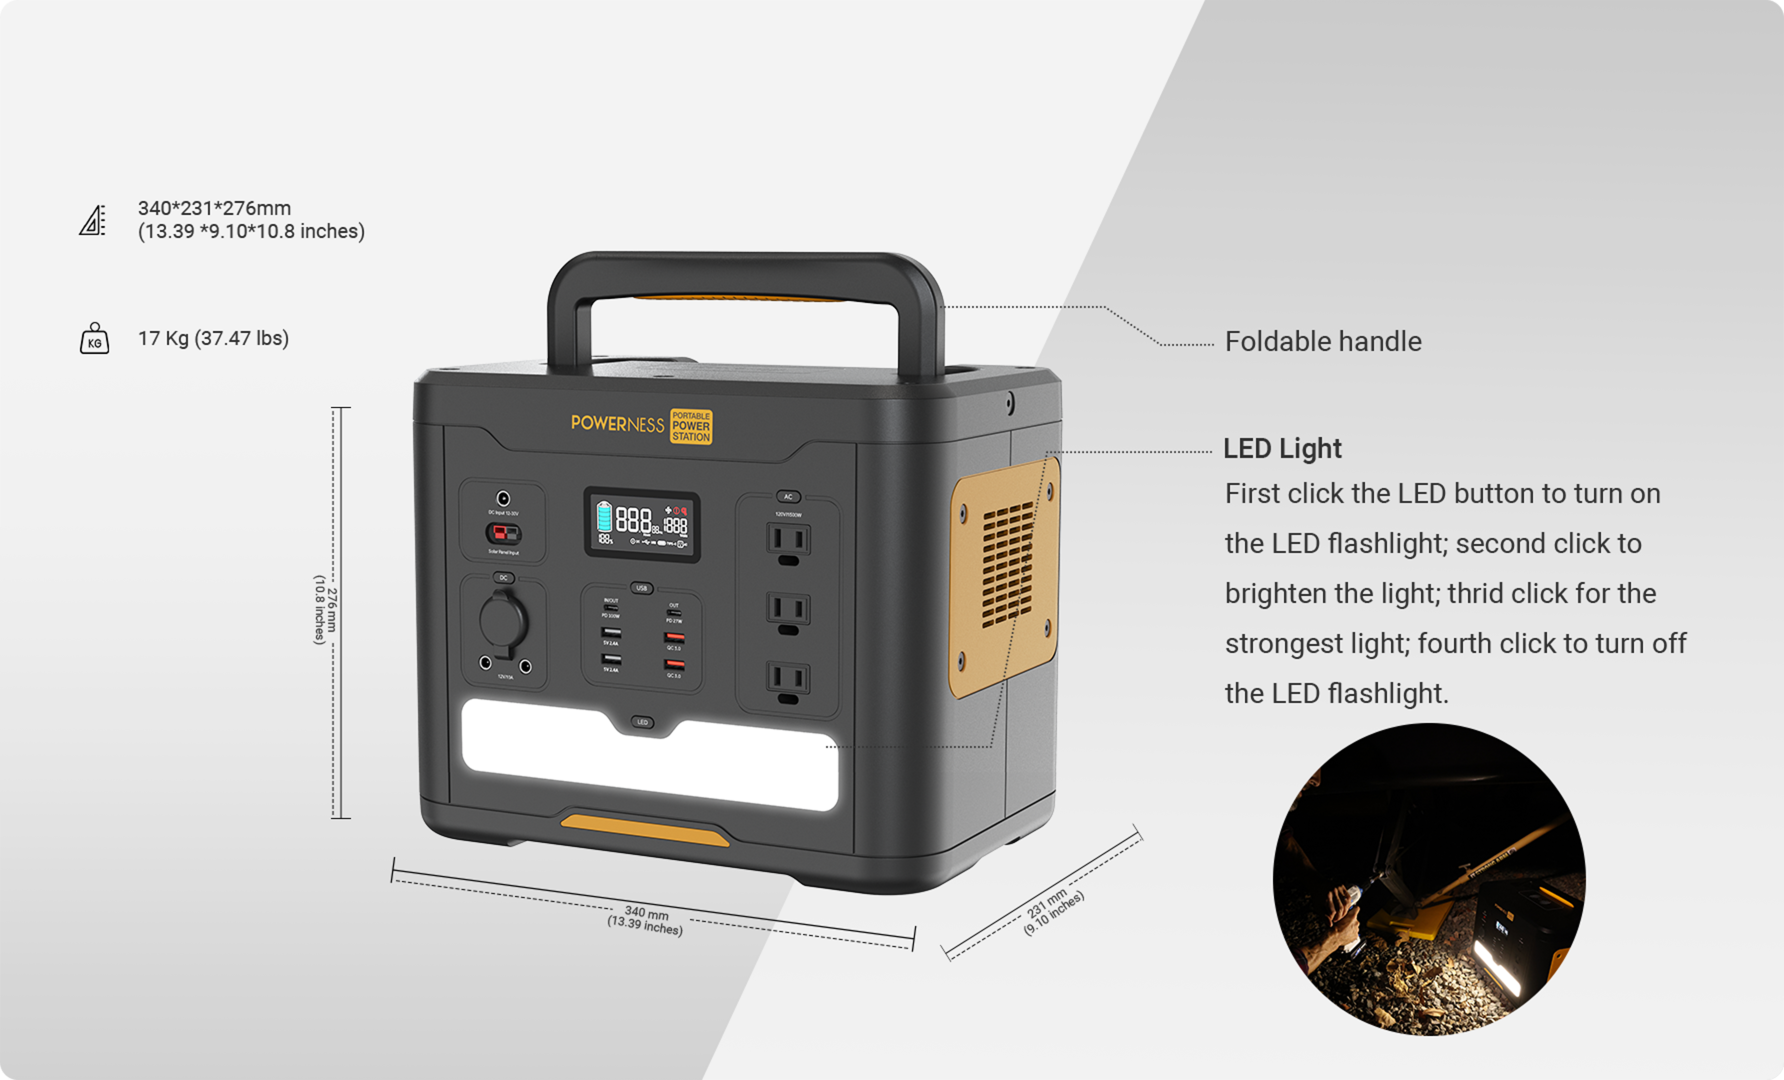 The weight and dimensions of Powerness Hiker U1500 Portable Power Station